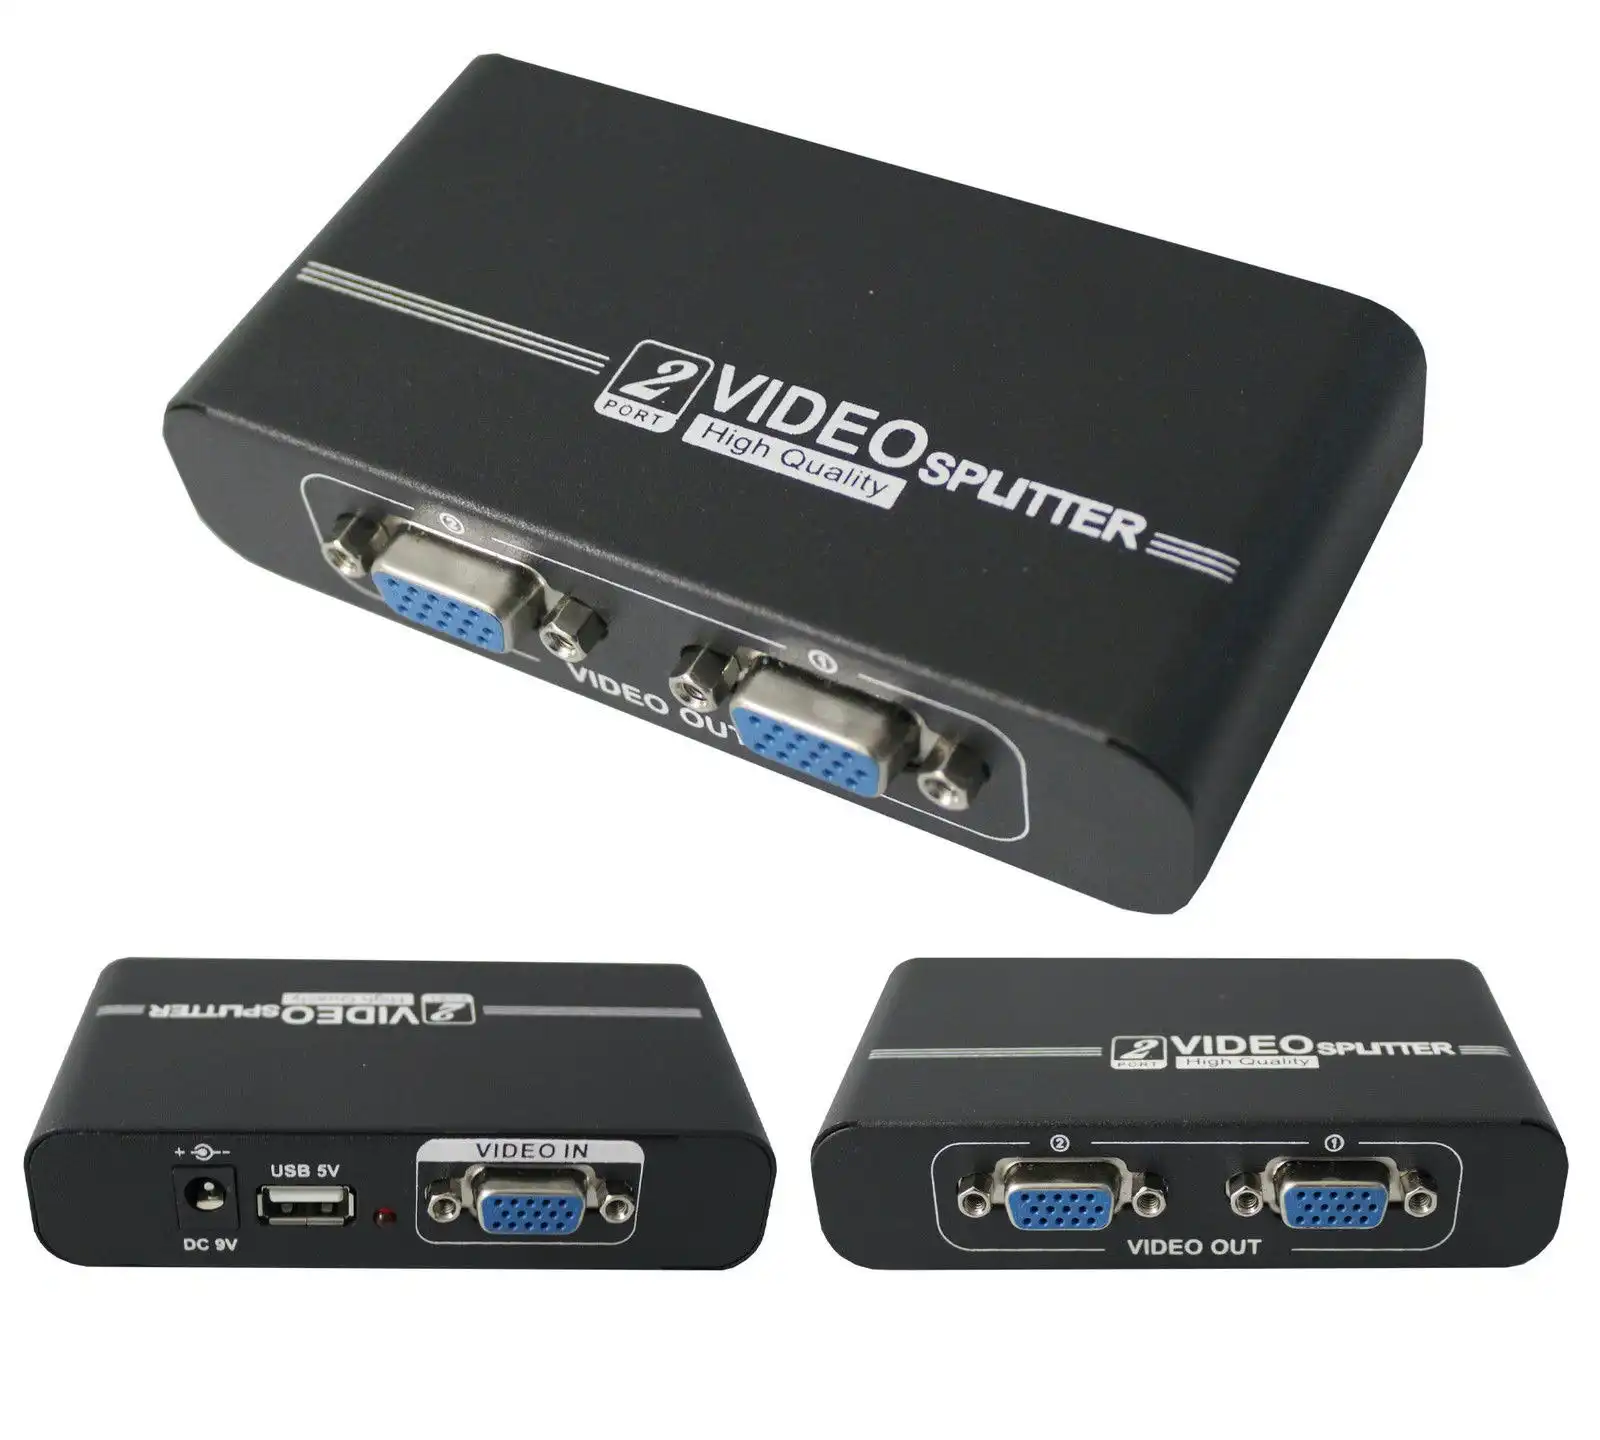 1 To 2 Port Vga Splitter High Resolution Support 1920 X 1440 550Mhz Video 102A